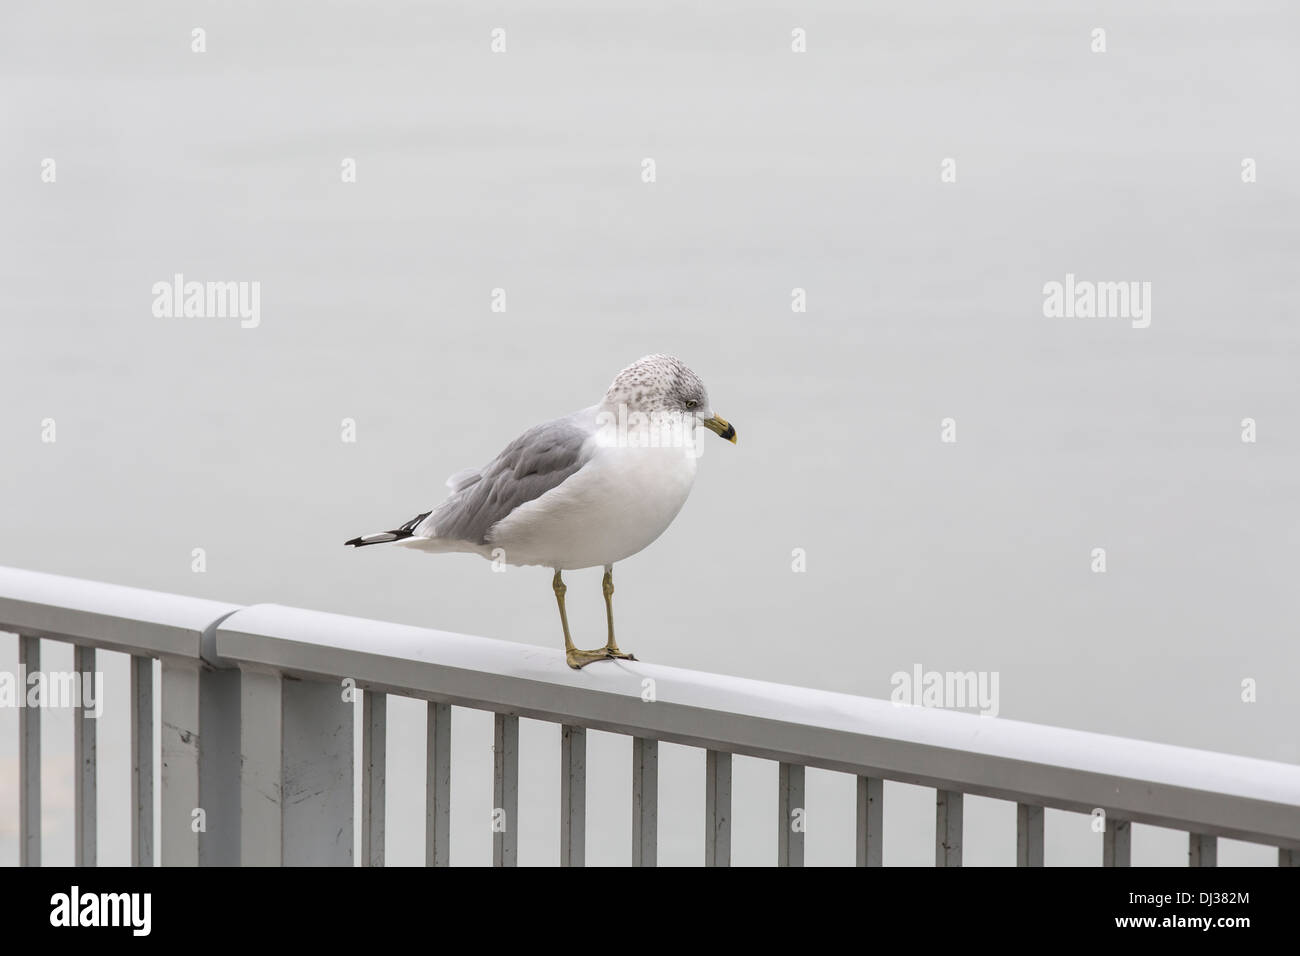 Seagull on River lake bird Banque D'Images